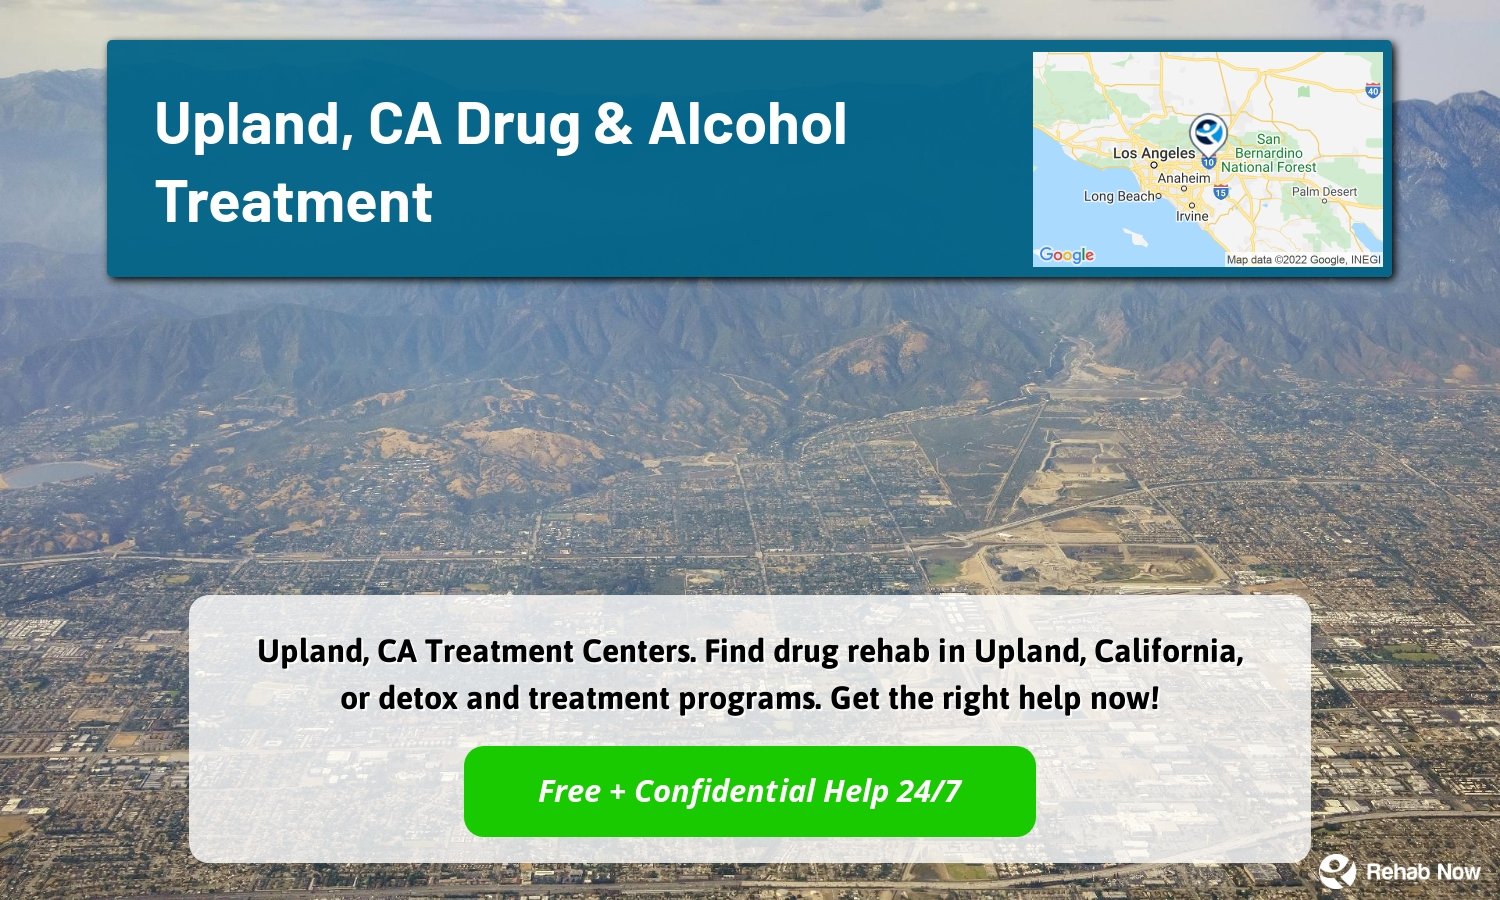 Upland, CA Treatment Centers. Find drug rehab in Upland, California, or detox and treatment programs. Get the right help now!